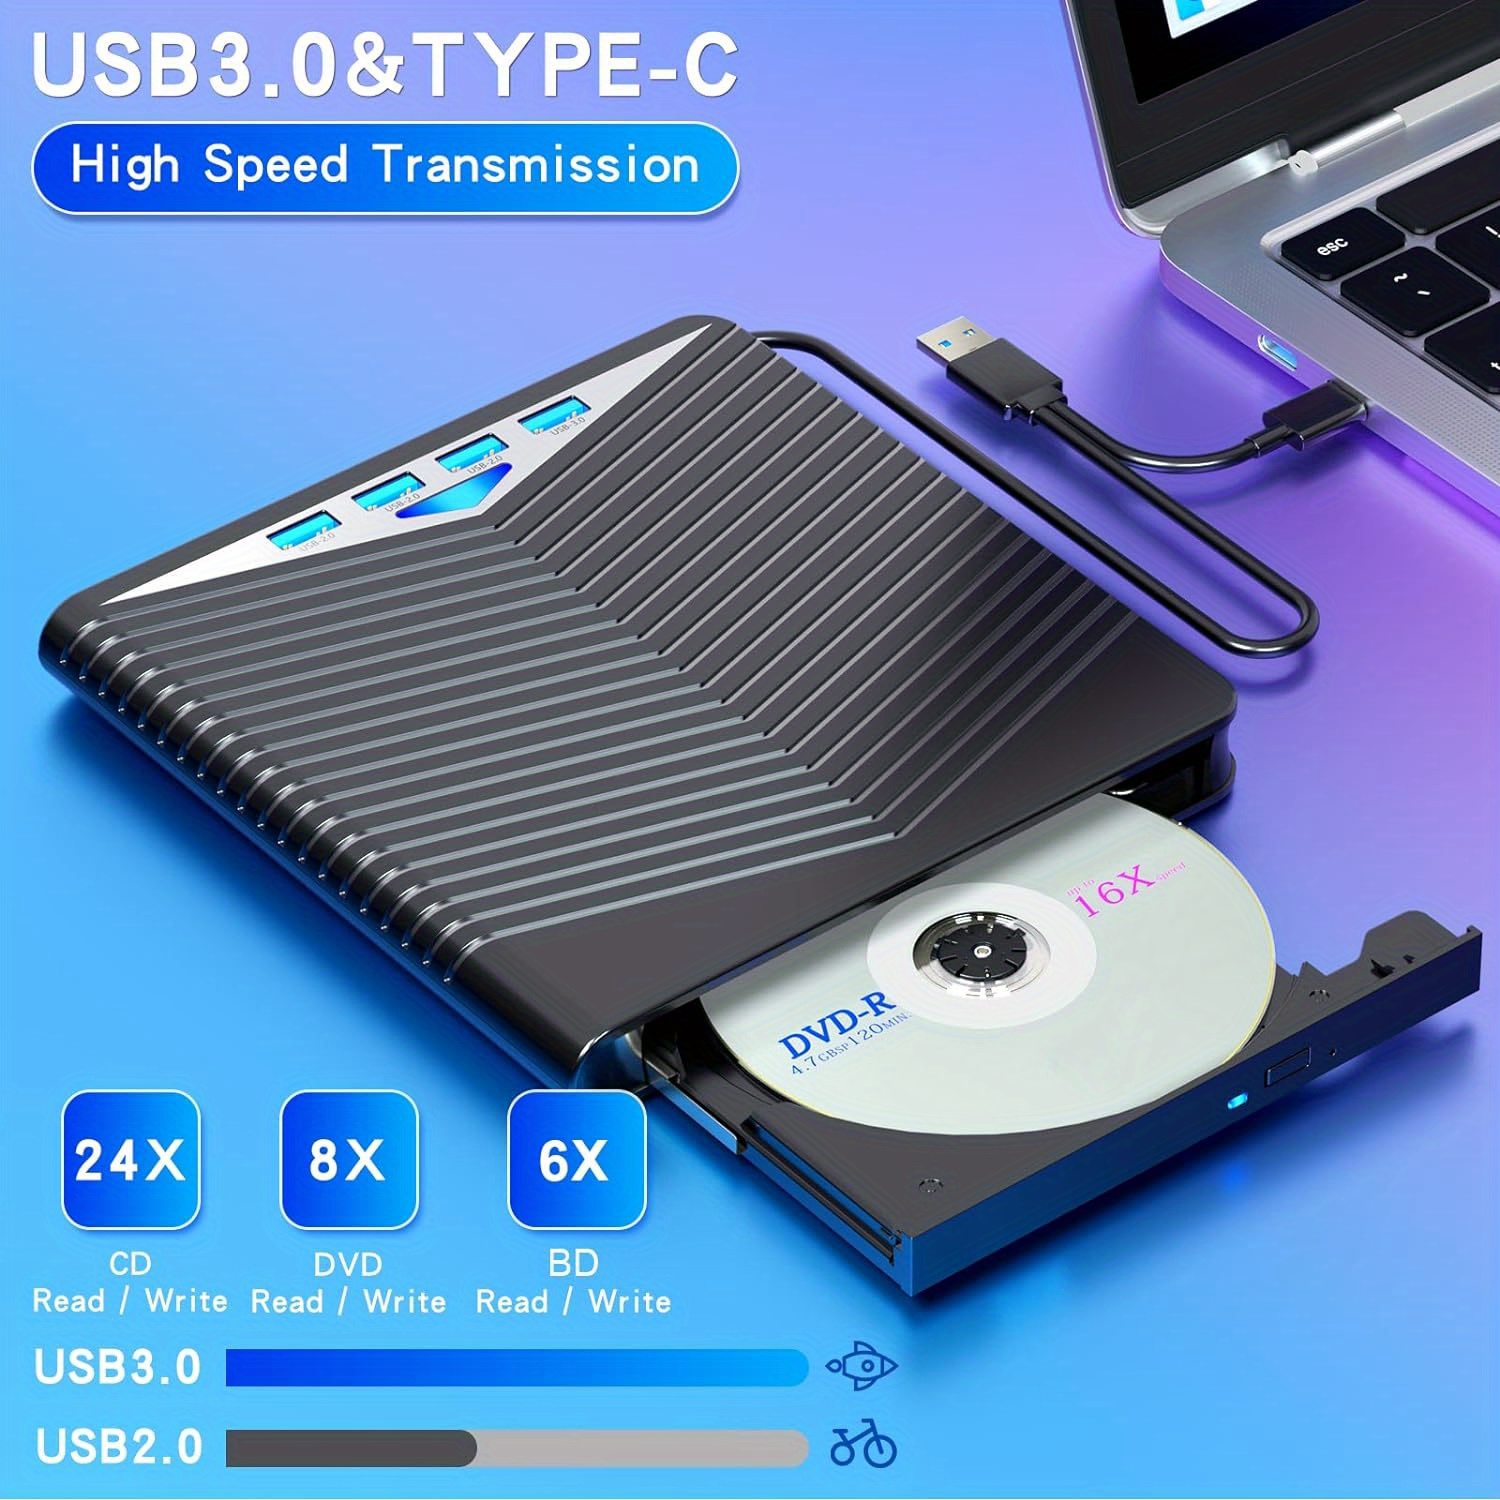 

Multifunctional External Cd Dvd Drive, Usb 3.0 Type-c Cd Dvd +/-rw Optical Drive Cd Burner, Ultra-slim Drive With 4 Usb Ports And Sd/tf Card Slots, Compatible With Linux Windows